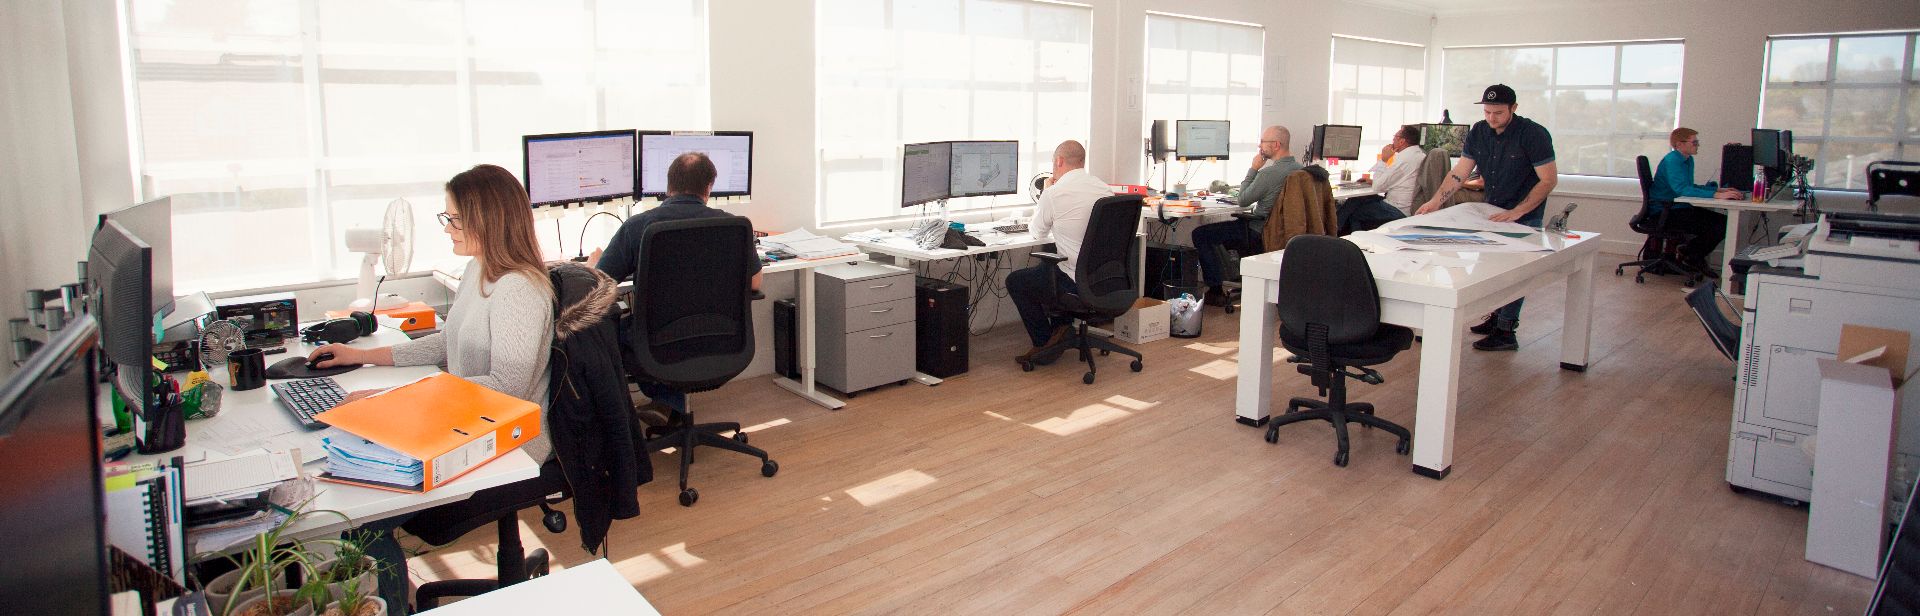 Creative Space employees working in an open office